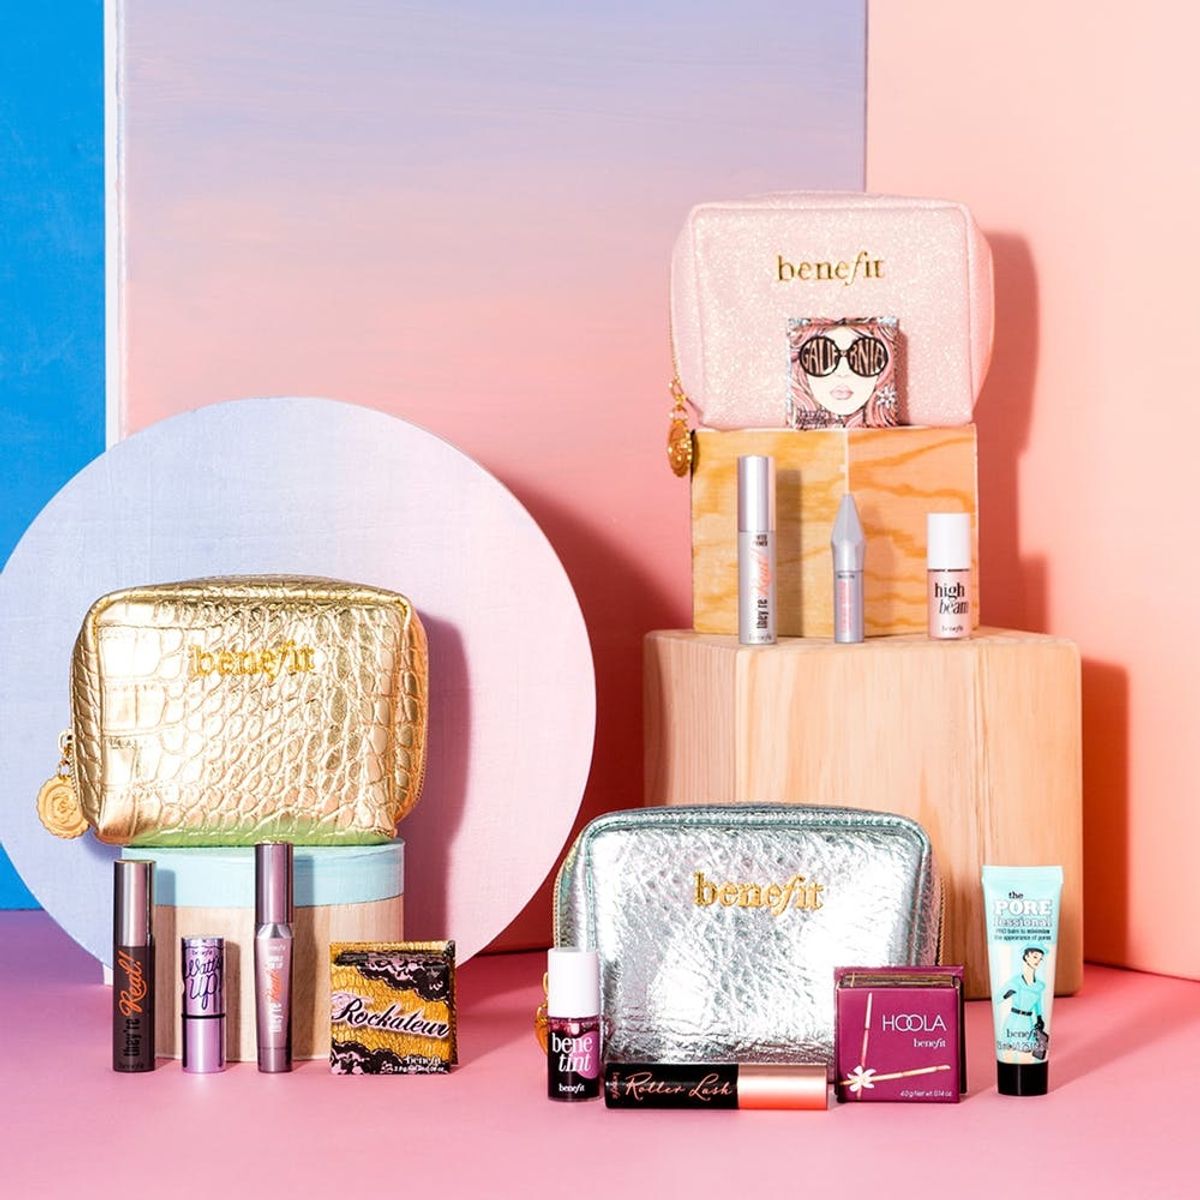 These New Sephora Products Are Everything Your Beauty Bag Needs for Spring